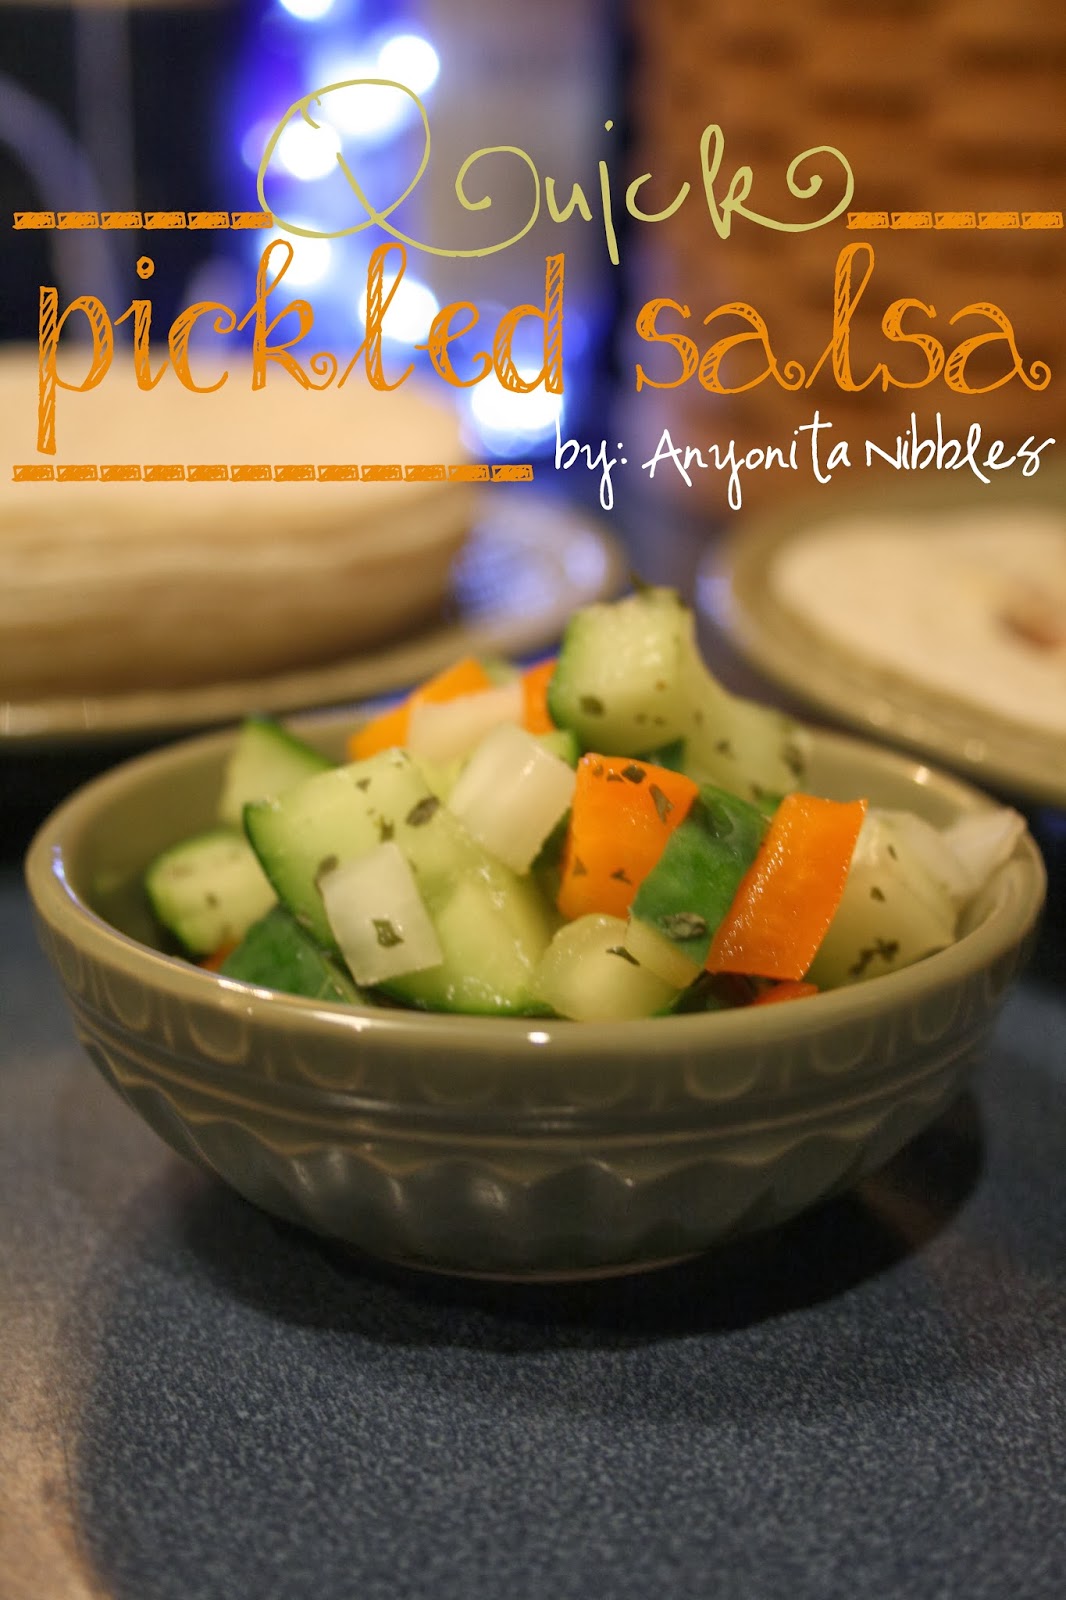 Quick Pickled Salsa for Fish Tacos from www.anyonita-nibbles.com